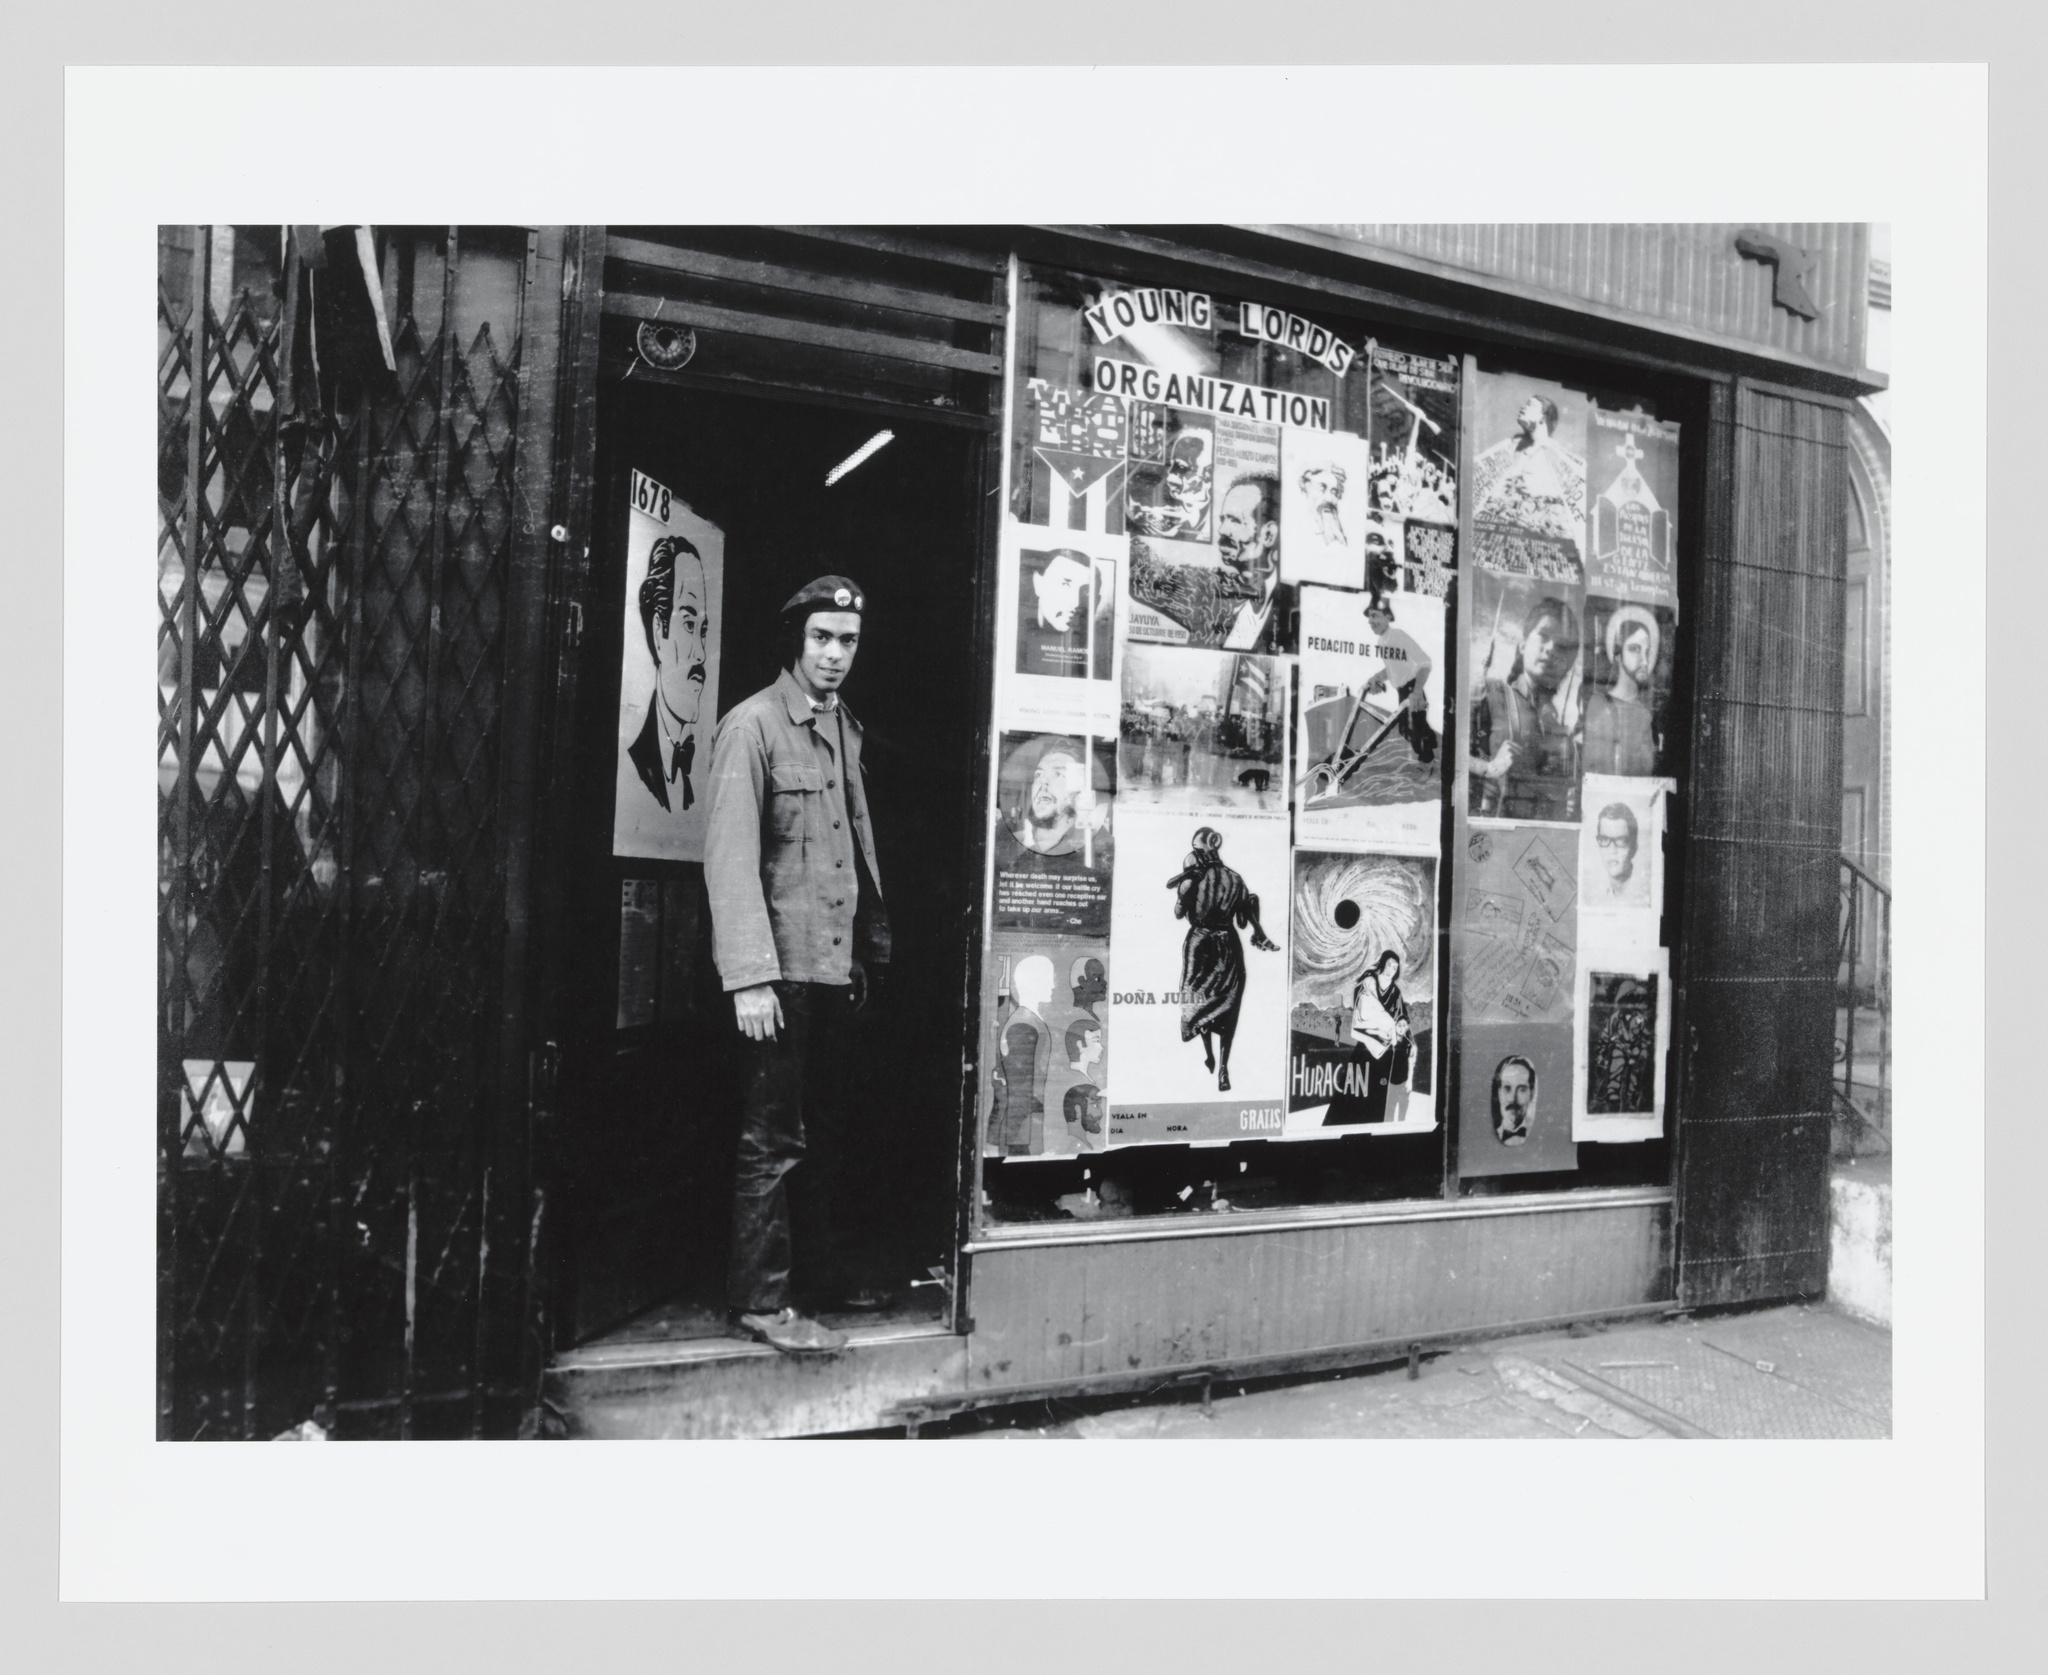 Hiram Maristany, Juan Gonzalez, Minister of Education of the Young Lords,  at original storefront office headquarters